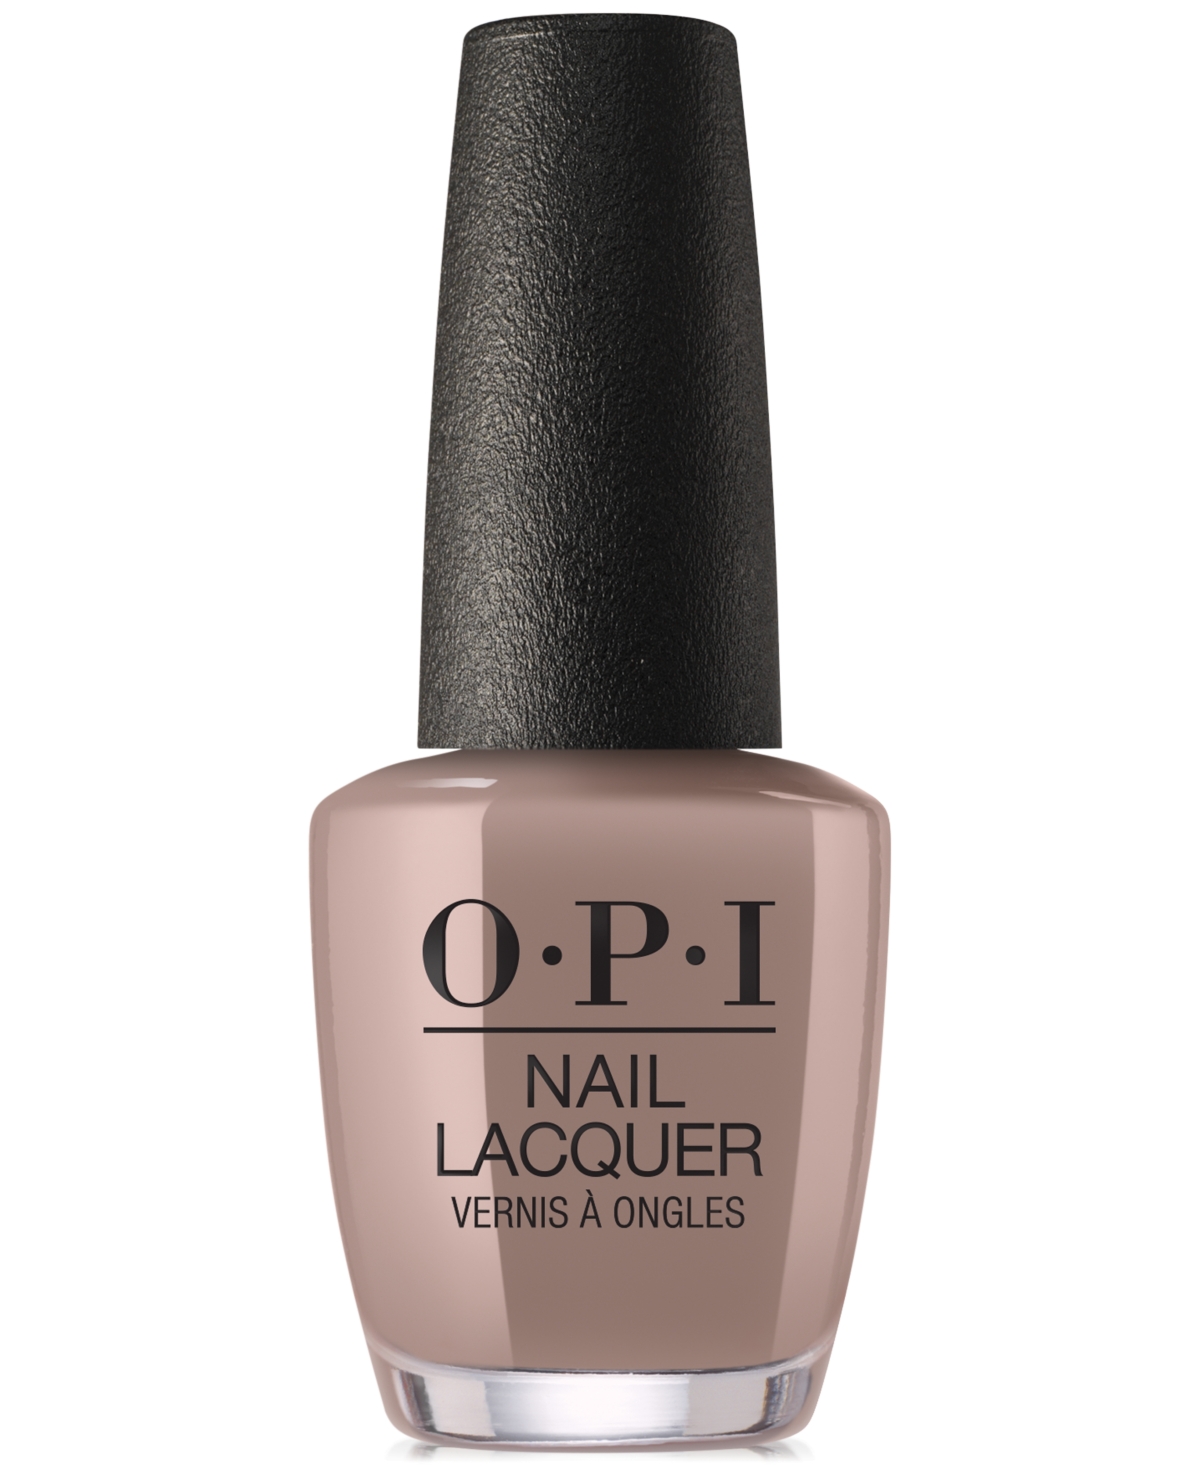 Opi Nail Lacquer In Icelanded A Bottle Of